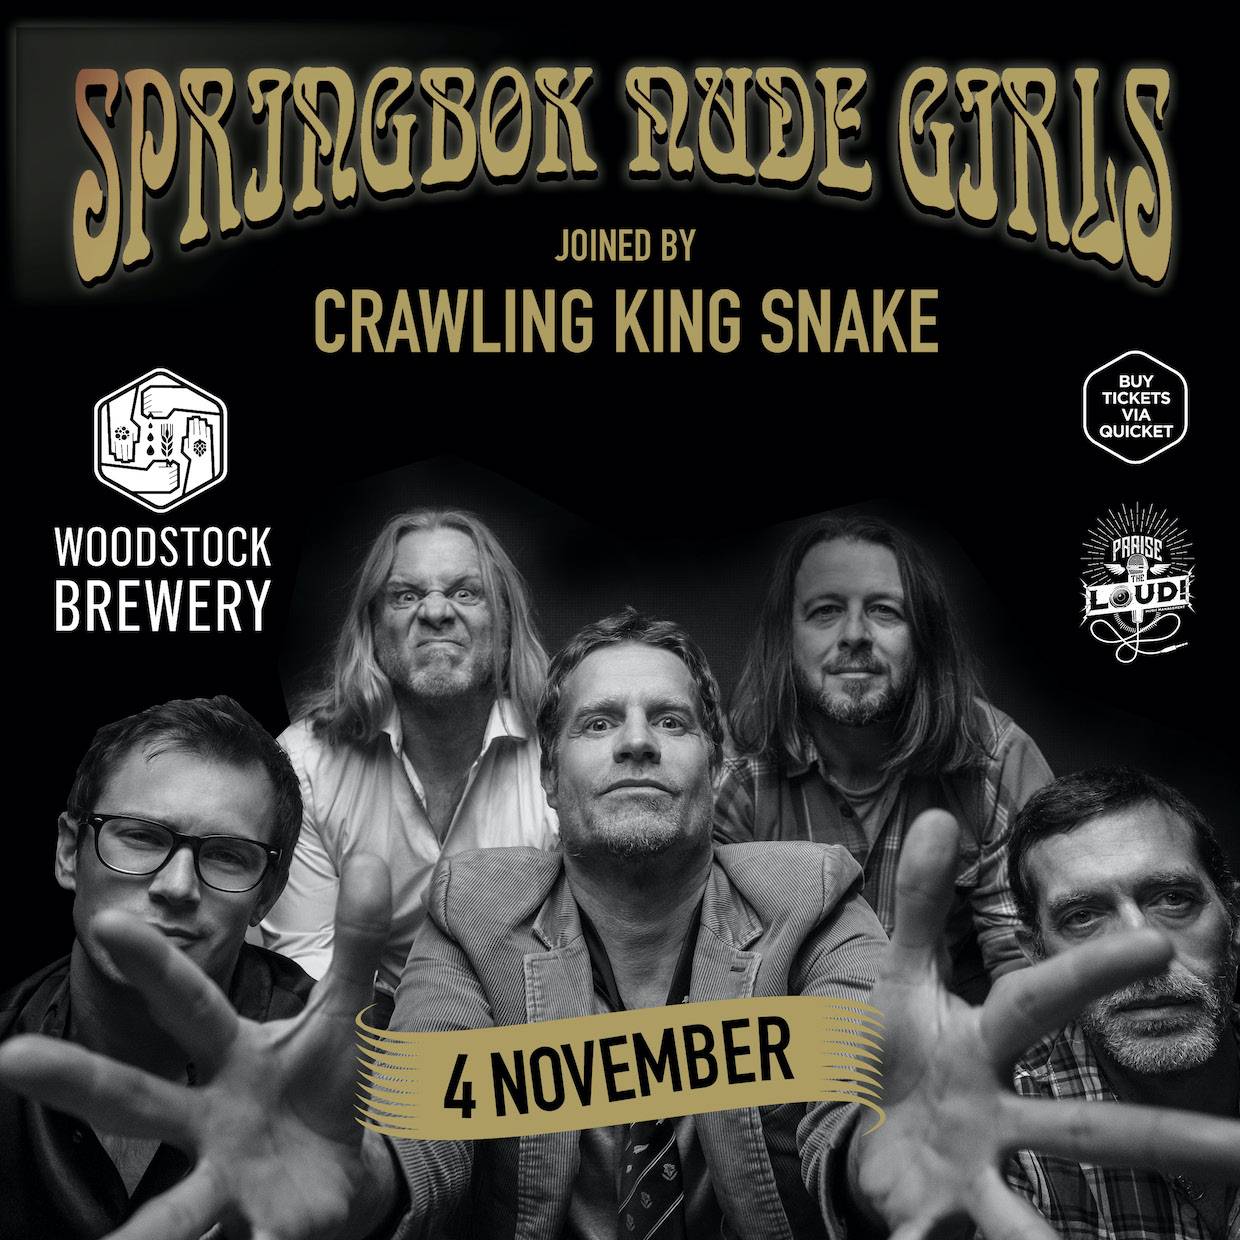 Springbok Nude Girls and Crawling King Snake - Wood Stock BreweryGiggity, Cape Town